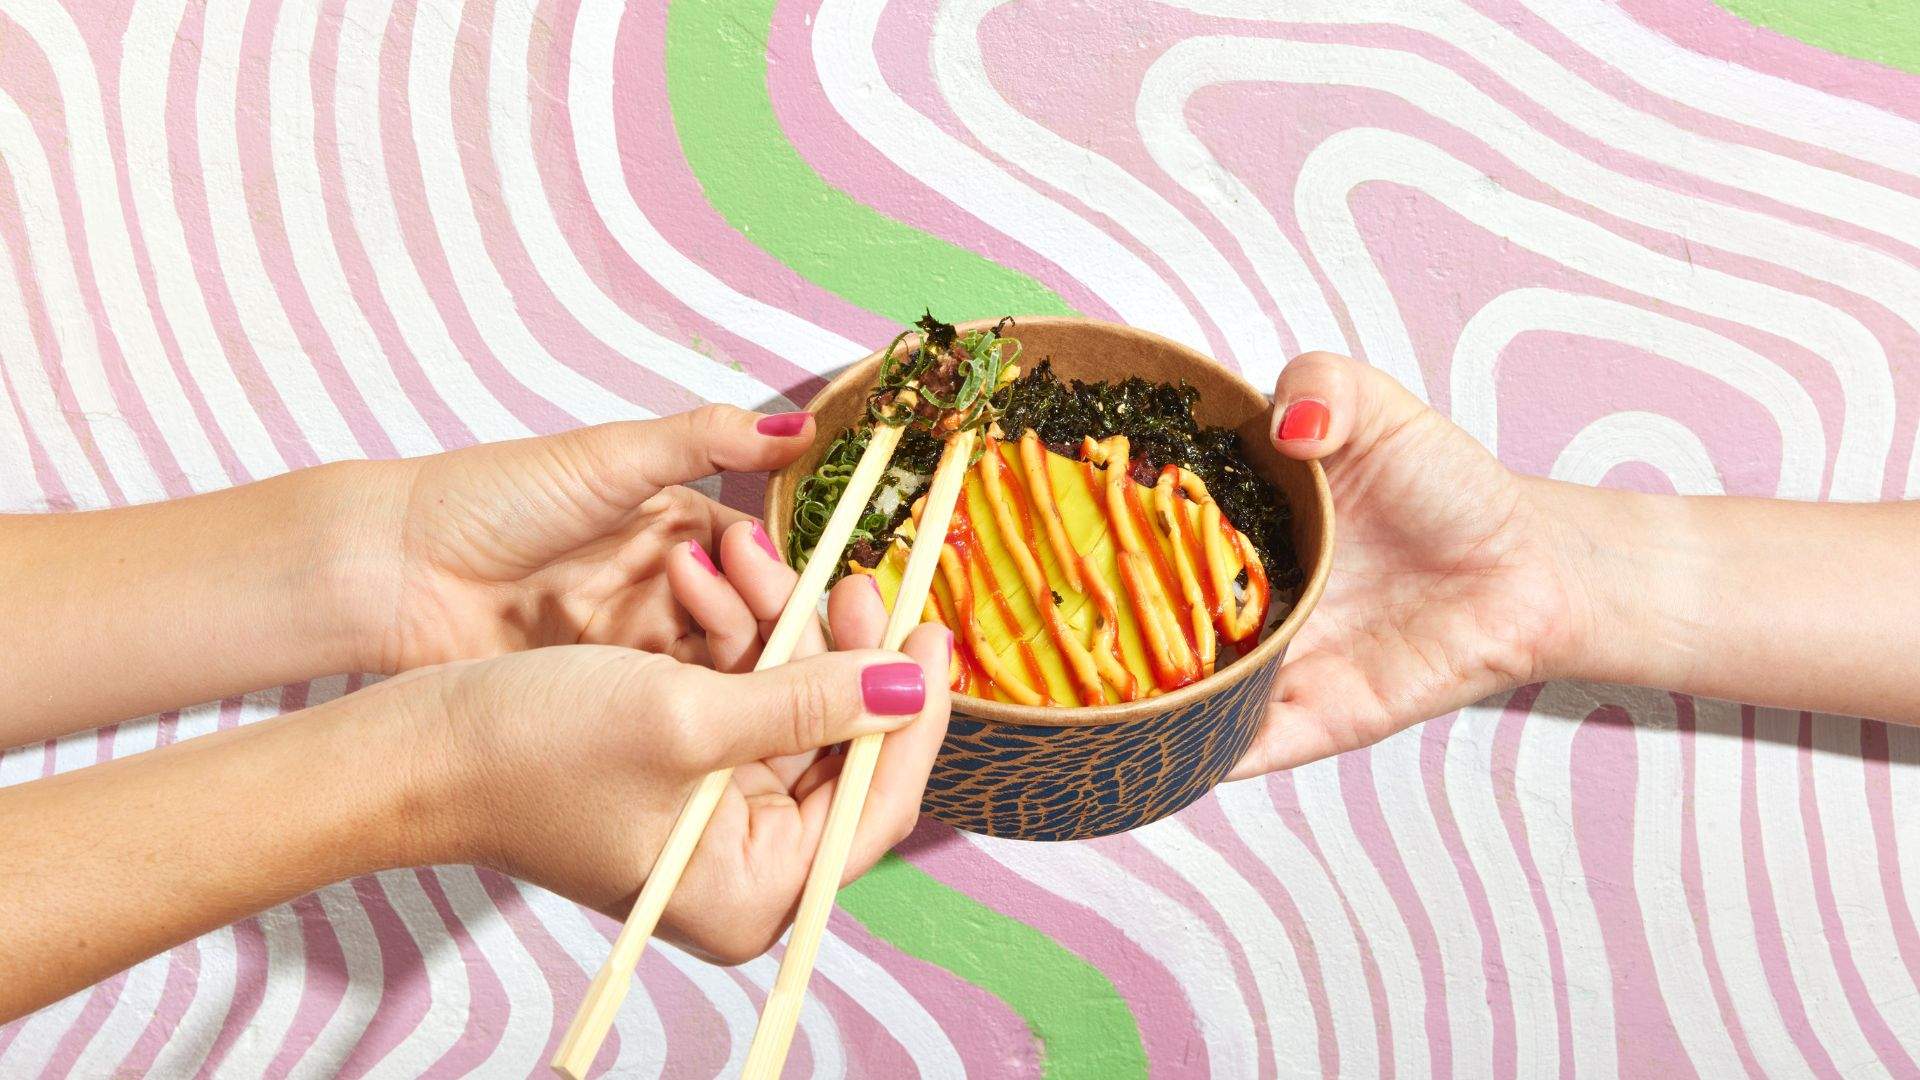 A pair of manicured hands holding a cardboard bowl containing the dish 'The 'Bondi don' which is made of a plant-based patty on a bed of rice, topped with vegan cheese with mustard and tomato sauce squeezed across the top and finished with shredded nori.